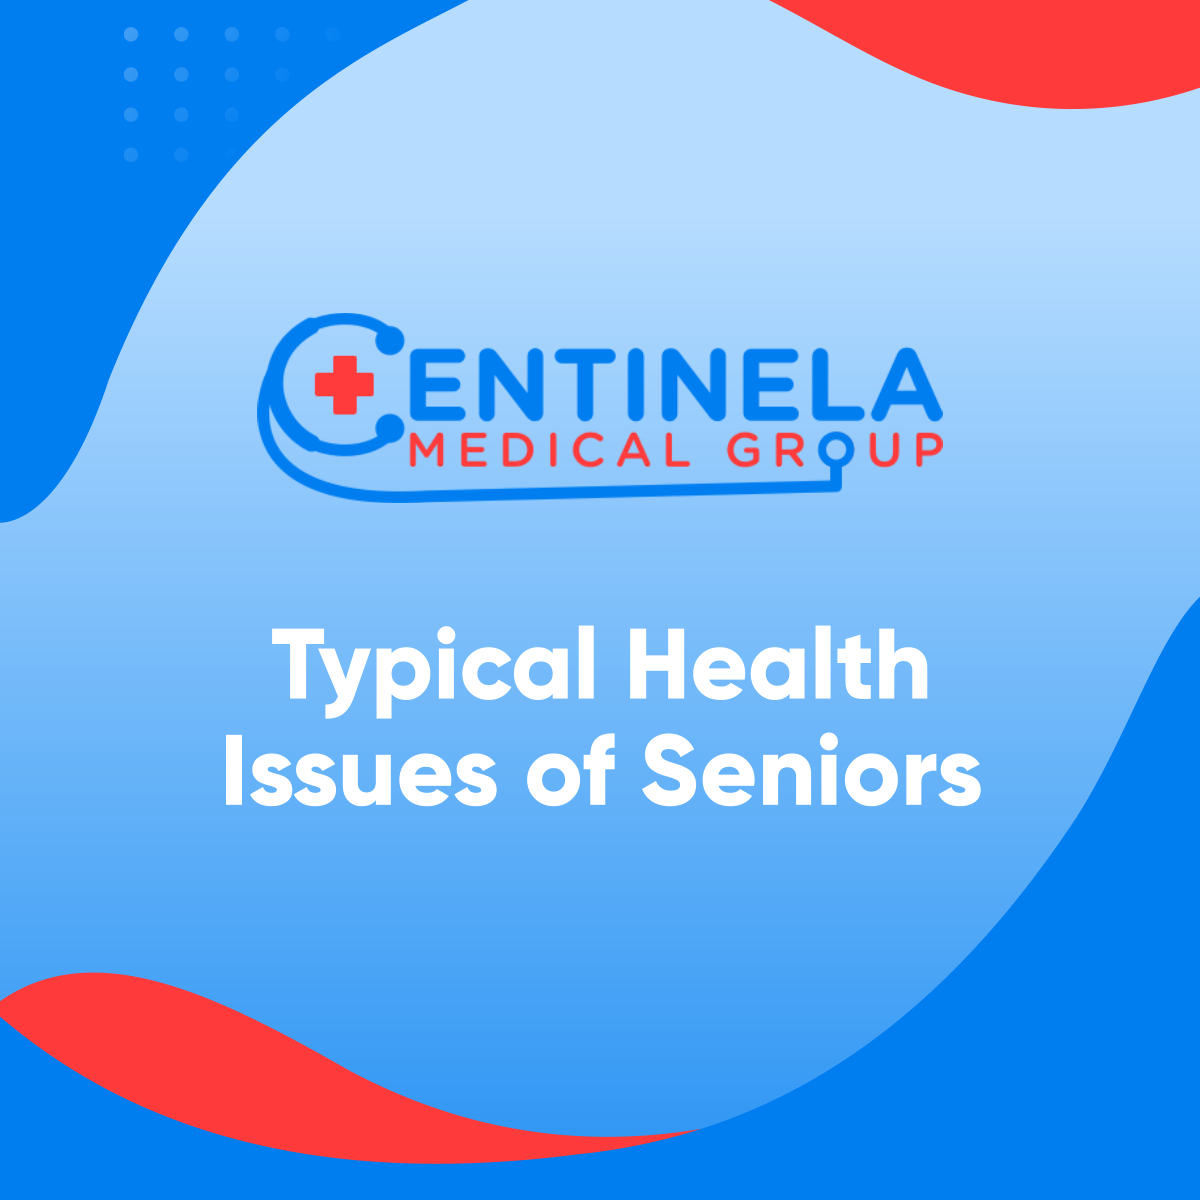 Here are some of the health issues that are common among seniors:

- injury and violence

- mental health issues

- illnesses caused by tobacco use

- substance abuse

- HIV/AIDS

Source:

bit.ly/3YZpnTW

#DoctorsClinic #HealthIssues  #LosAngelesCA